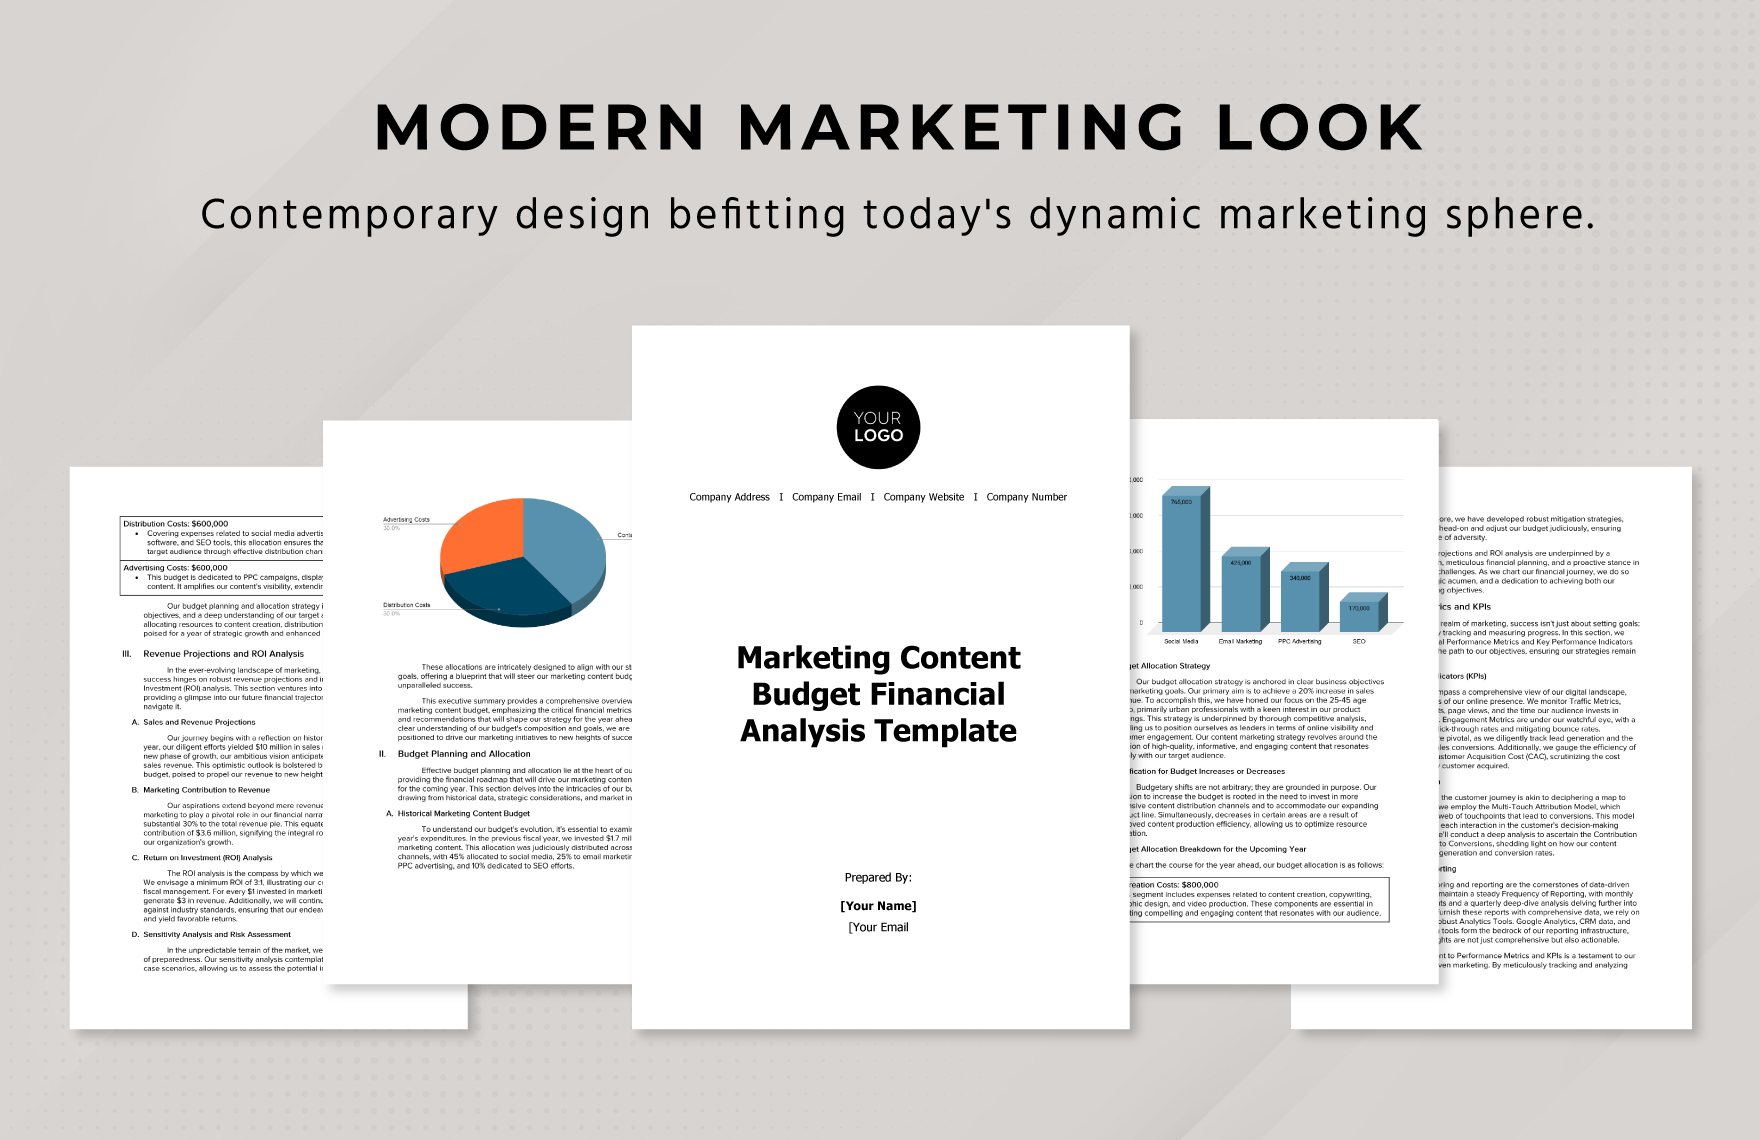 Marketing Content Budget Financial Analysis Template